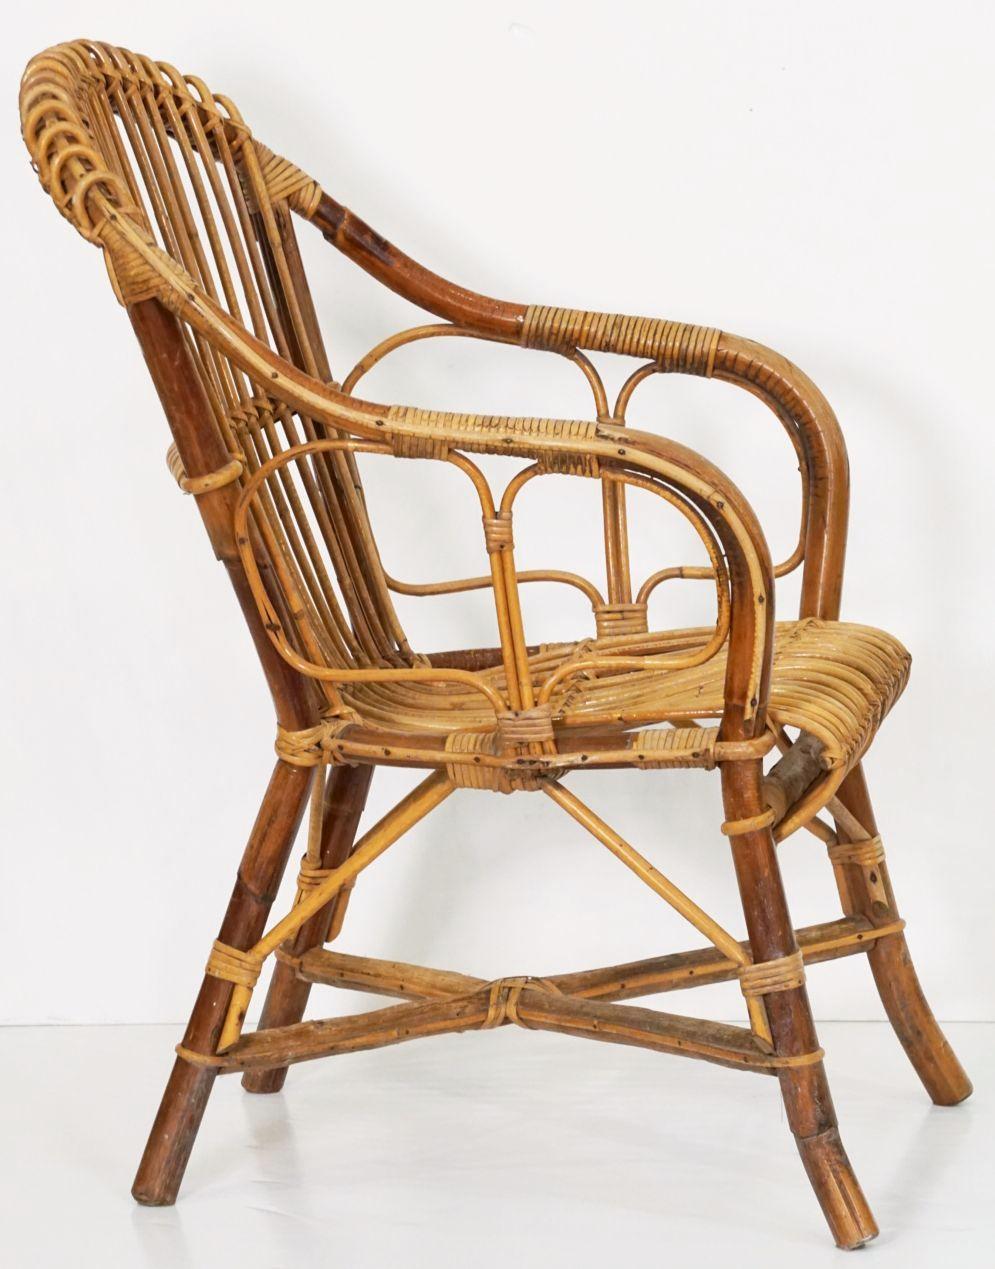 Italian Fan-Backed Arm Chairs of Rattan and Bamboo from the Mid-20th Century For Sale 4